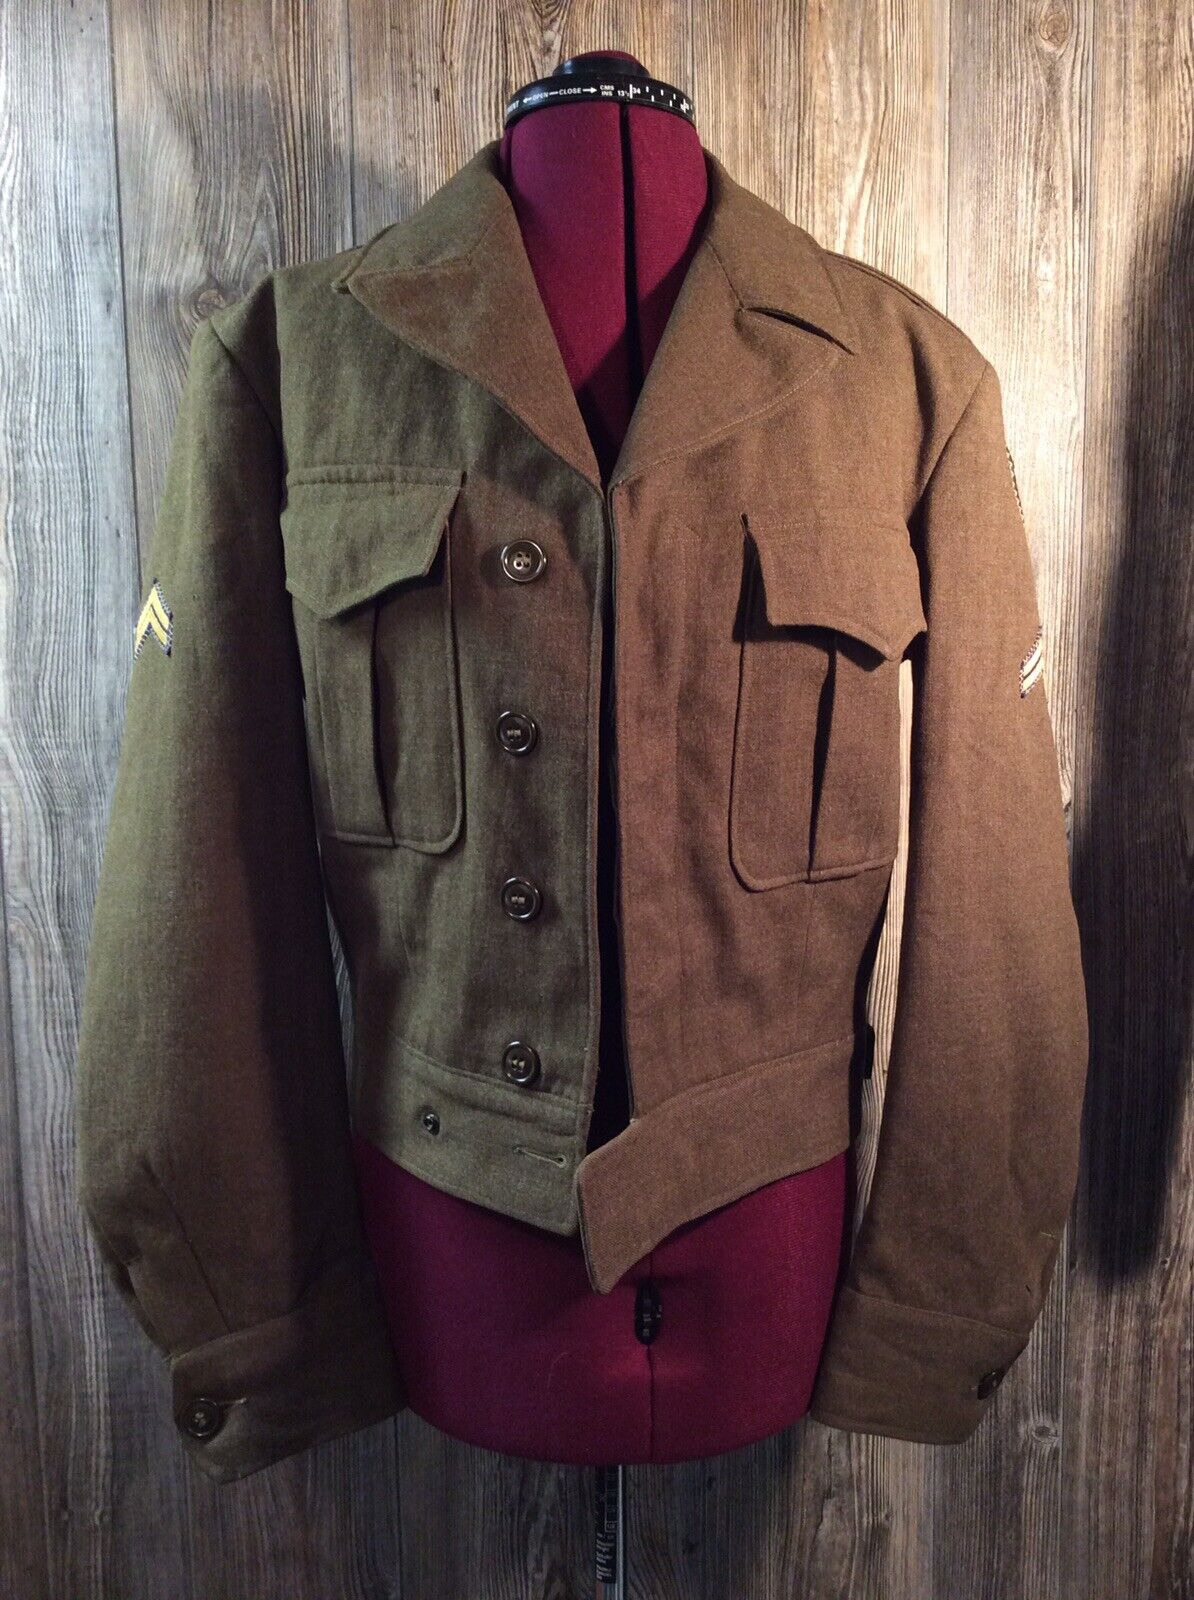 Vtg Men\'s 1948 Post WWII US Army Air Force Ike Jacket sz 36R 55-J-569-670 H4